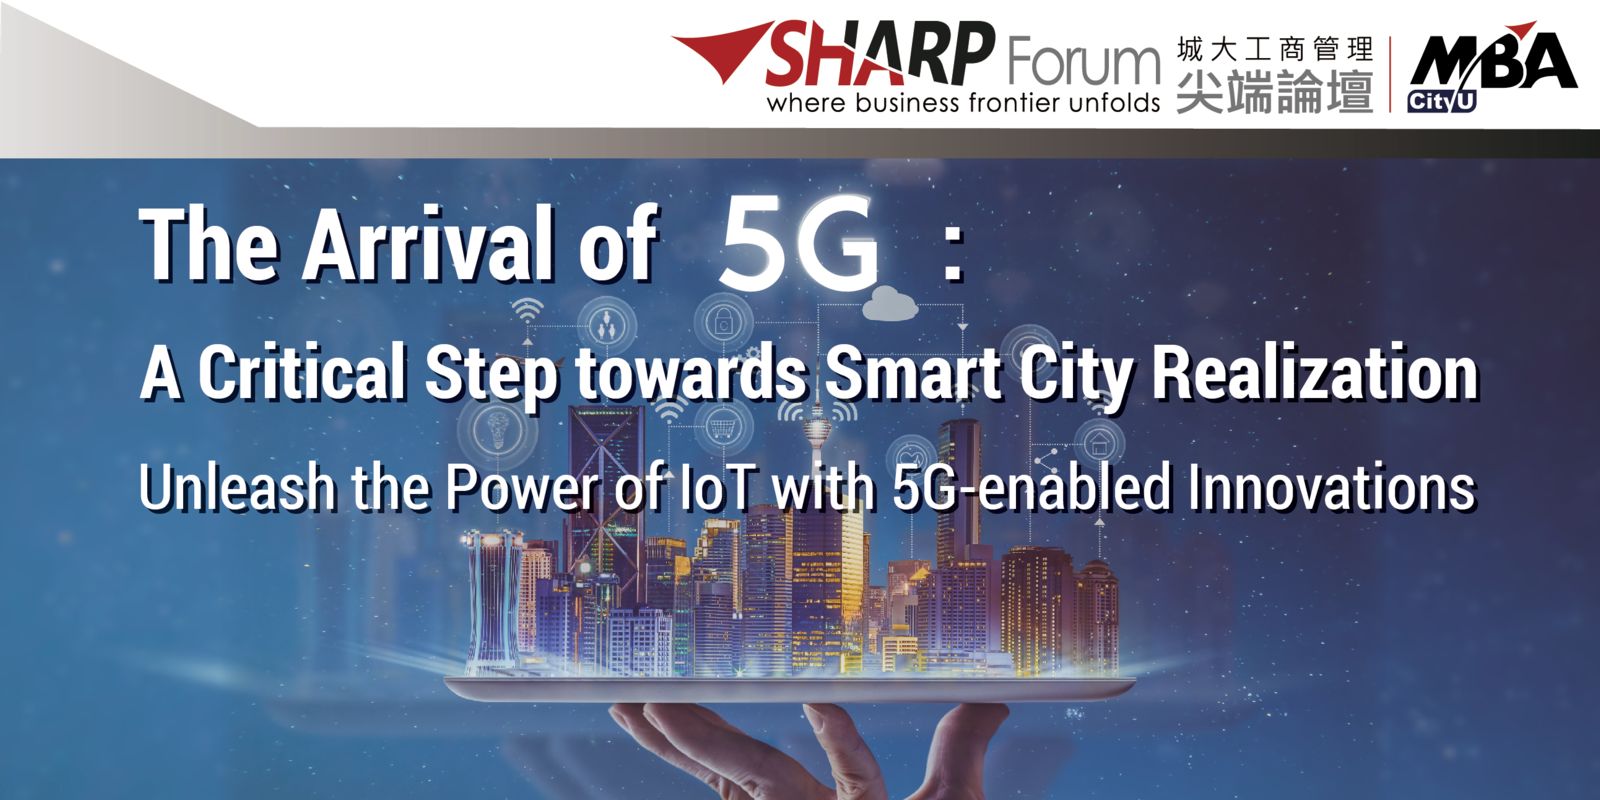 The Arrival of 5G: A Critical Step towards Smart City Realization